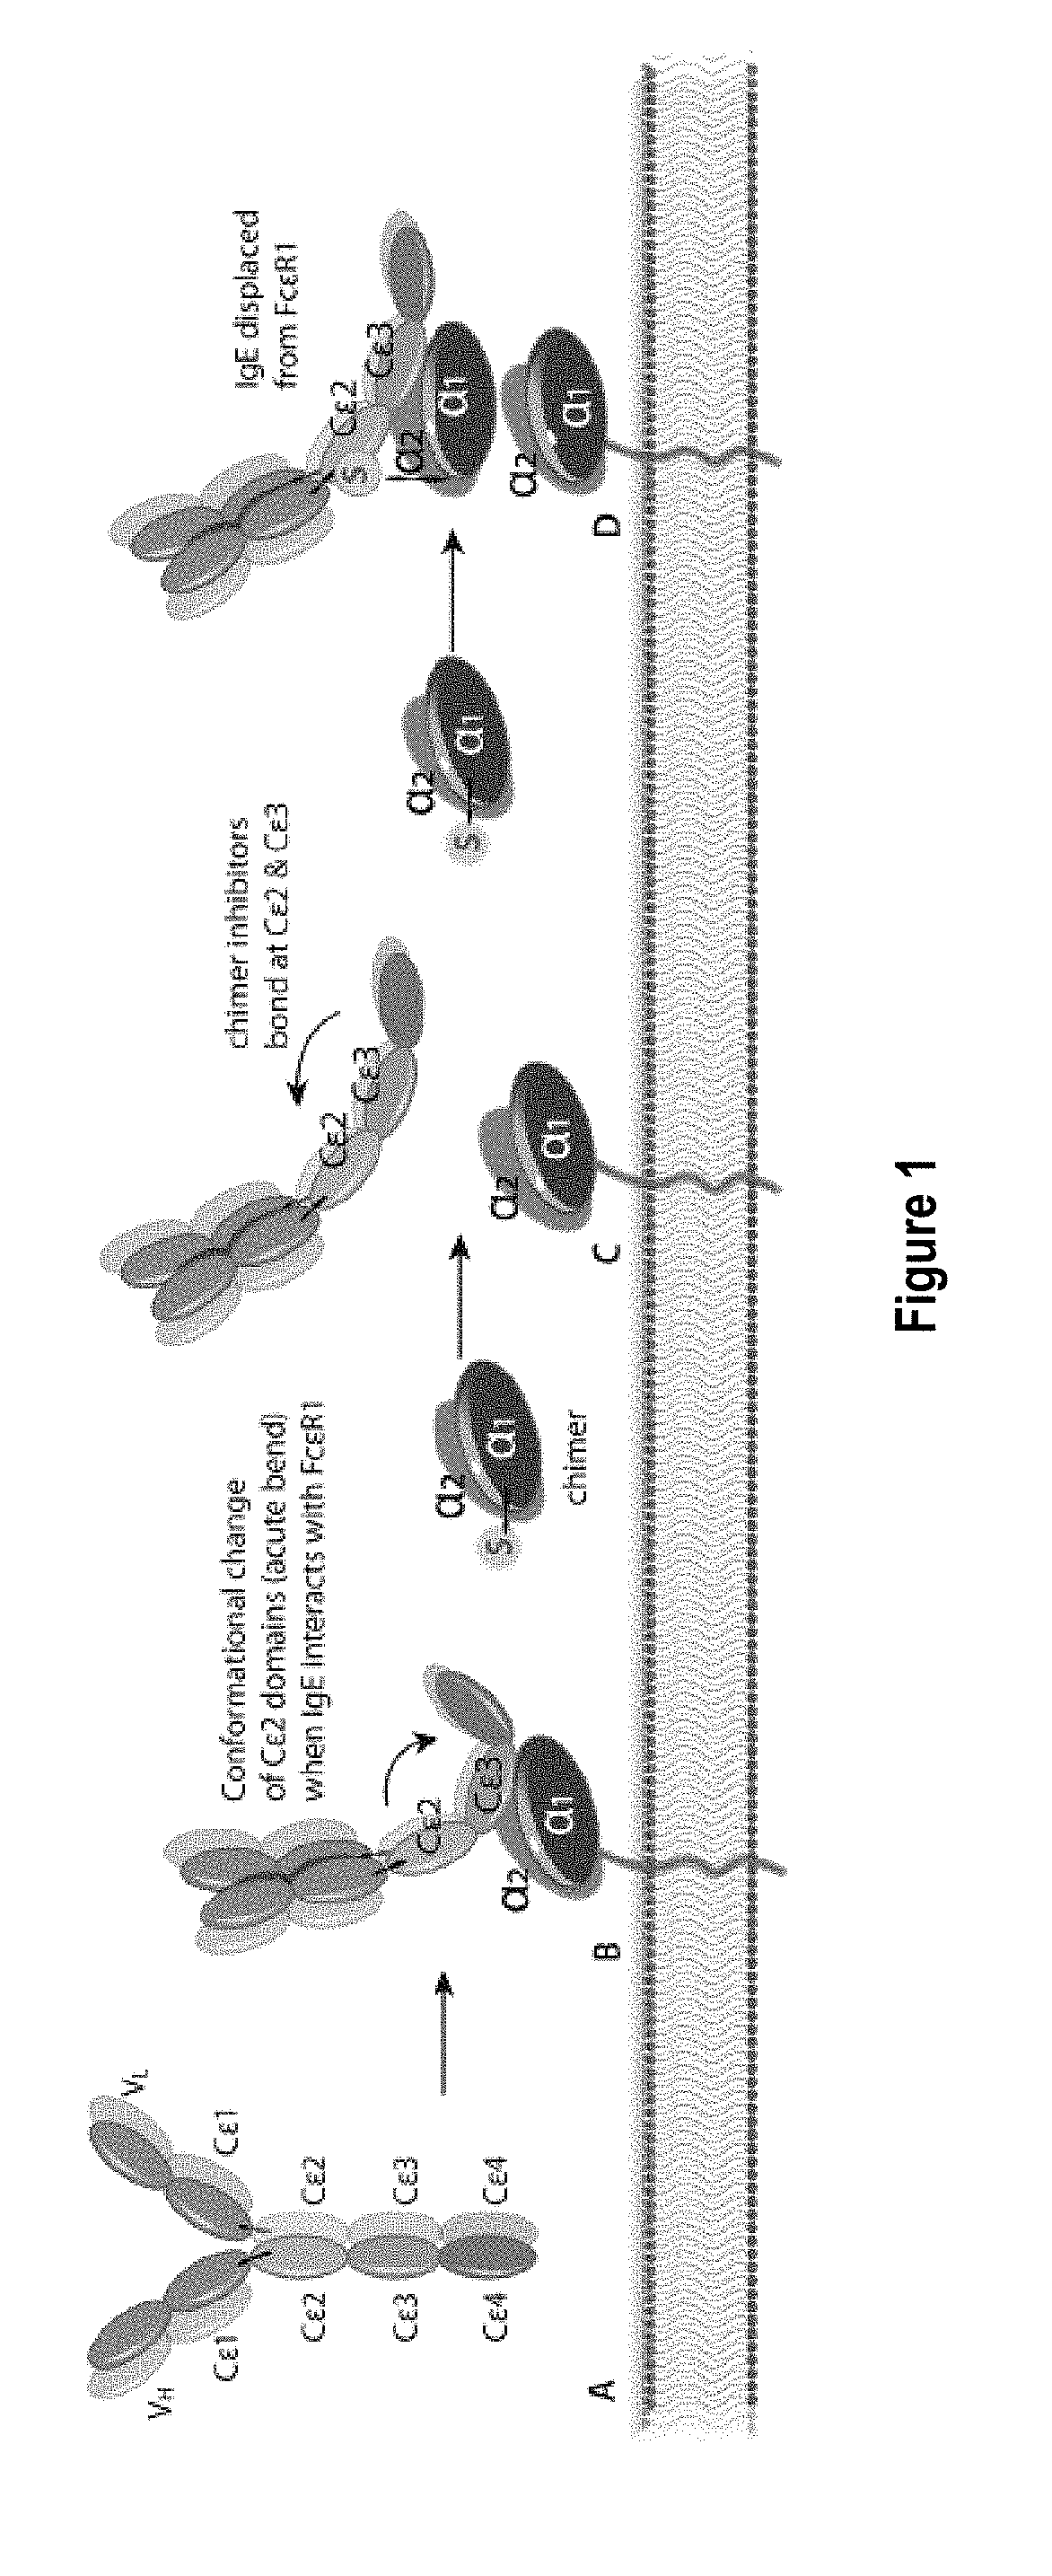 Treatment of allergic diseases with chimeric protein